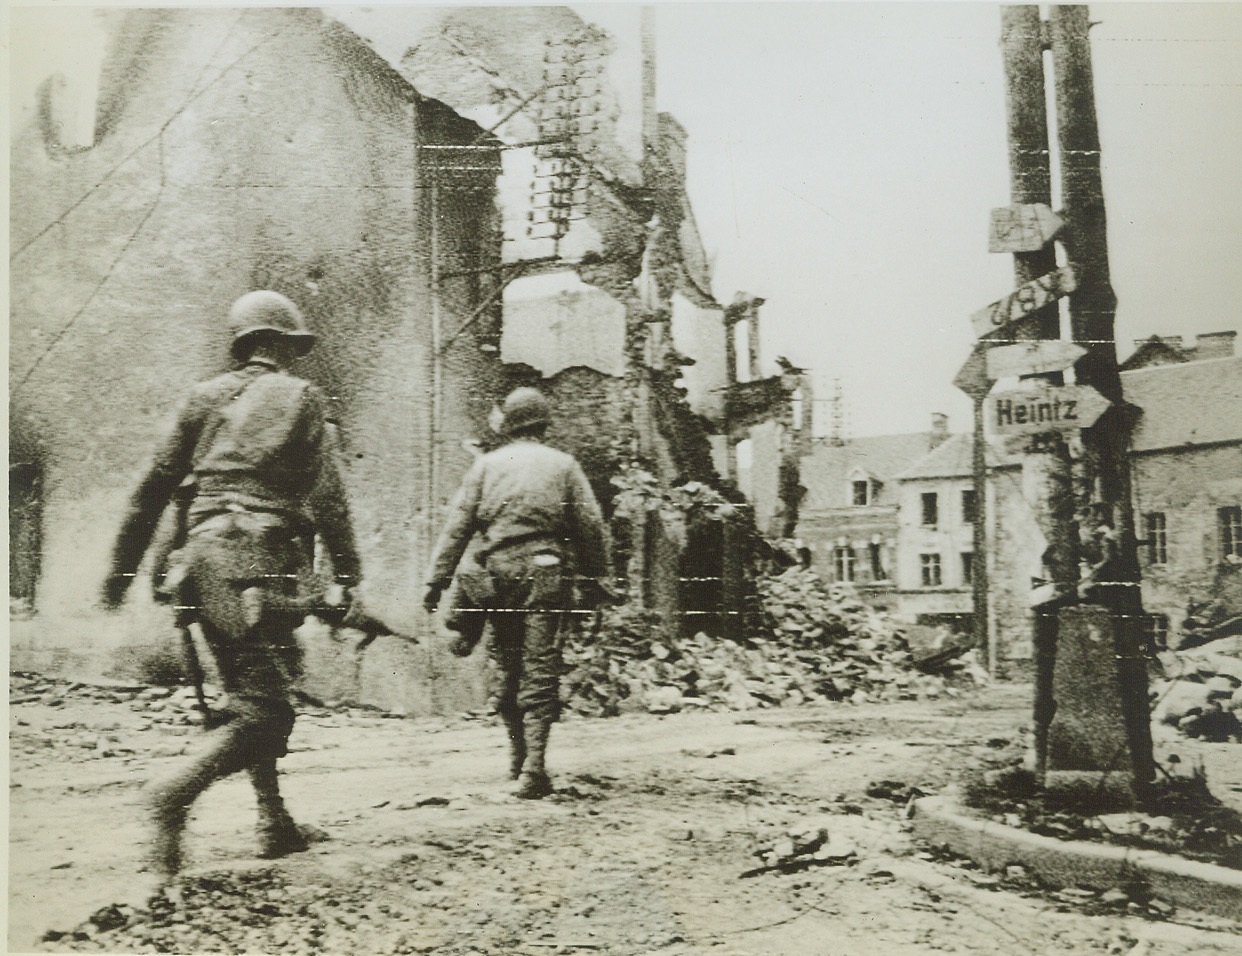 Yanks Mop Up In Marigny, 7/29/1944. France—American soldiers cautiously advance through the ruins of Marigny, France, on the look out for enemy snipers. Last pockets of resistance in the town have been cleaned out by mopping up units.  Credit: Signal Corps radiotelephoto by ACME;